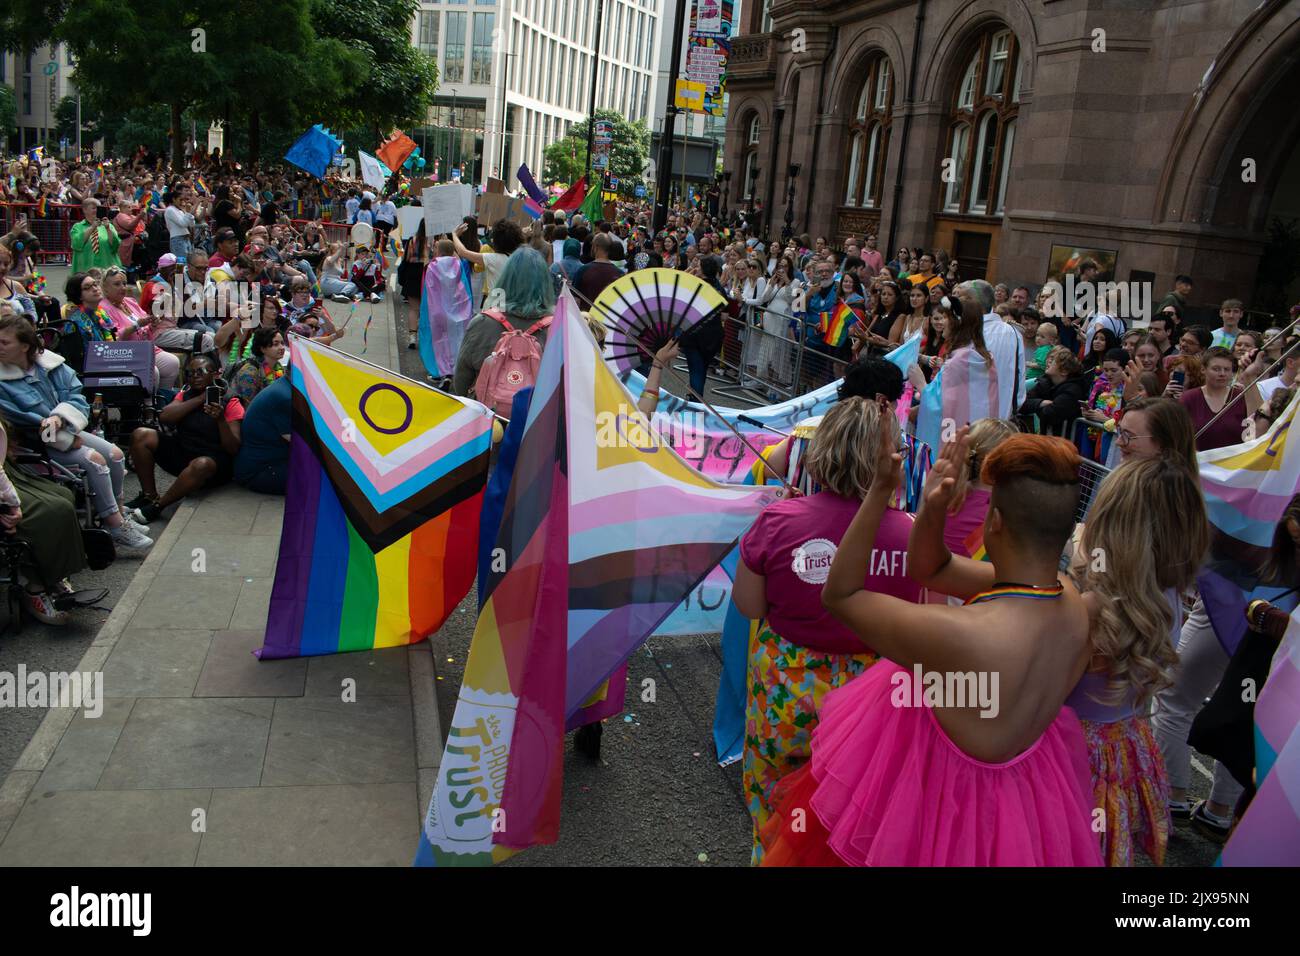 Manchester Pride parade. The Proud Trust in St Peter's Square. Theme March for Peace. Stock Photo